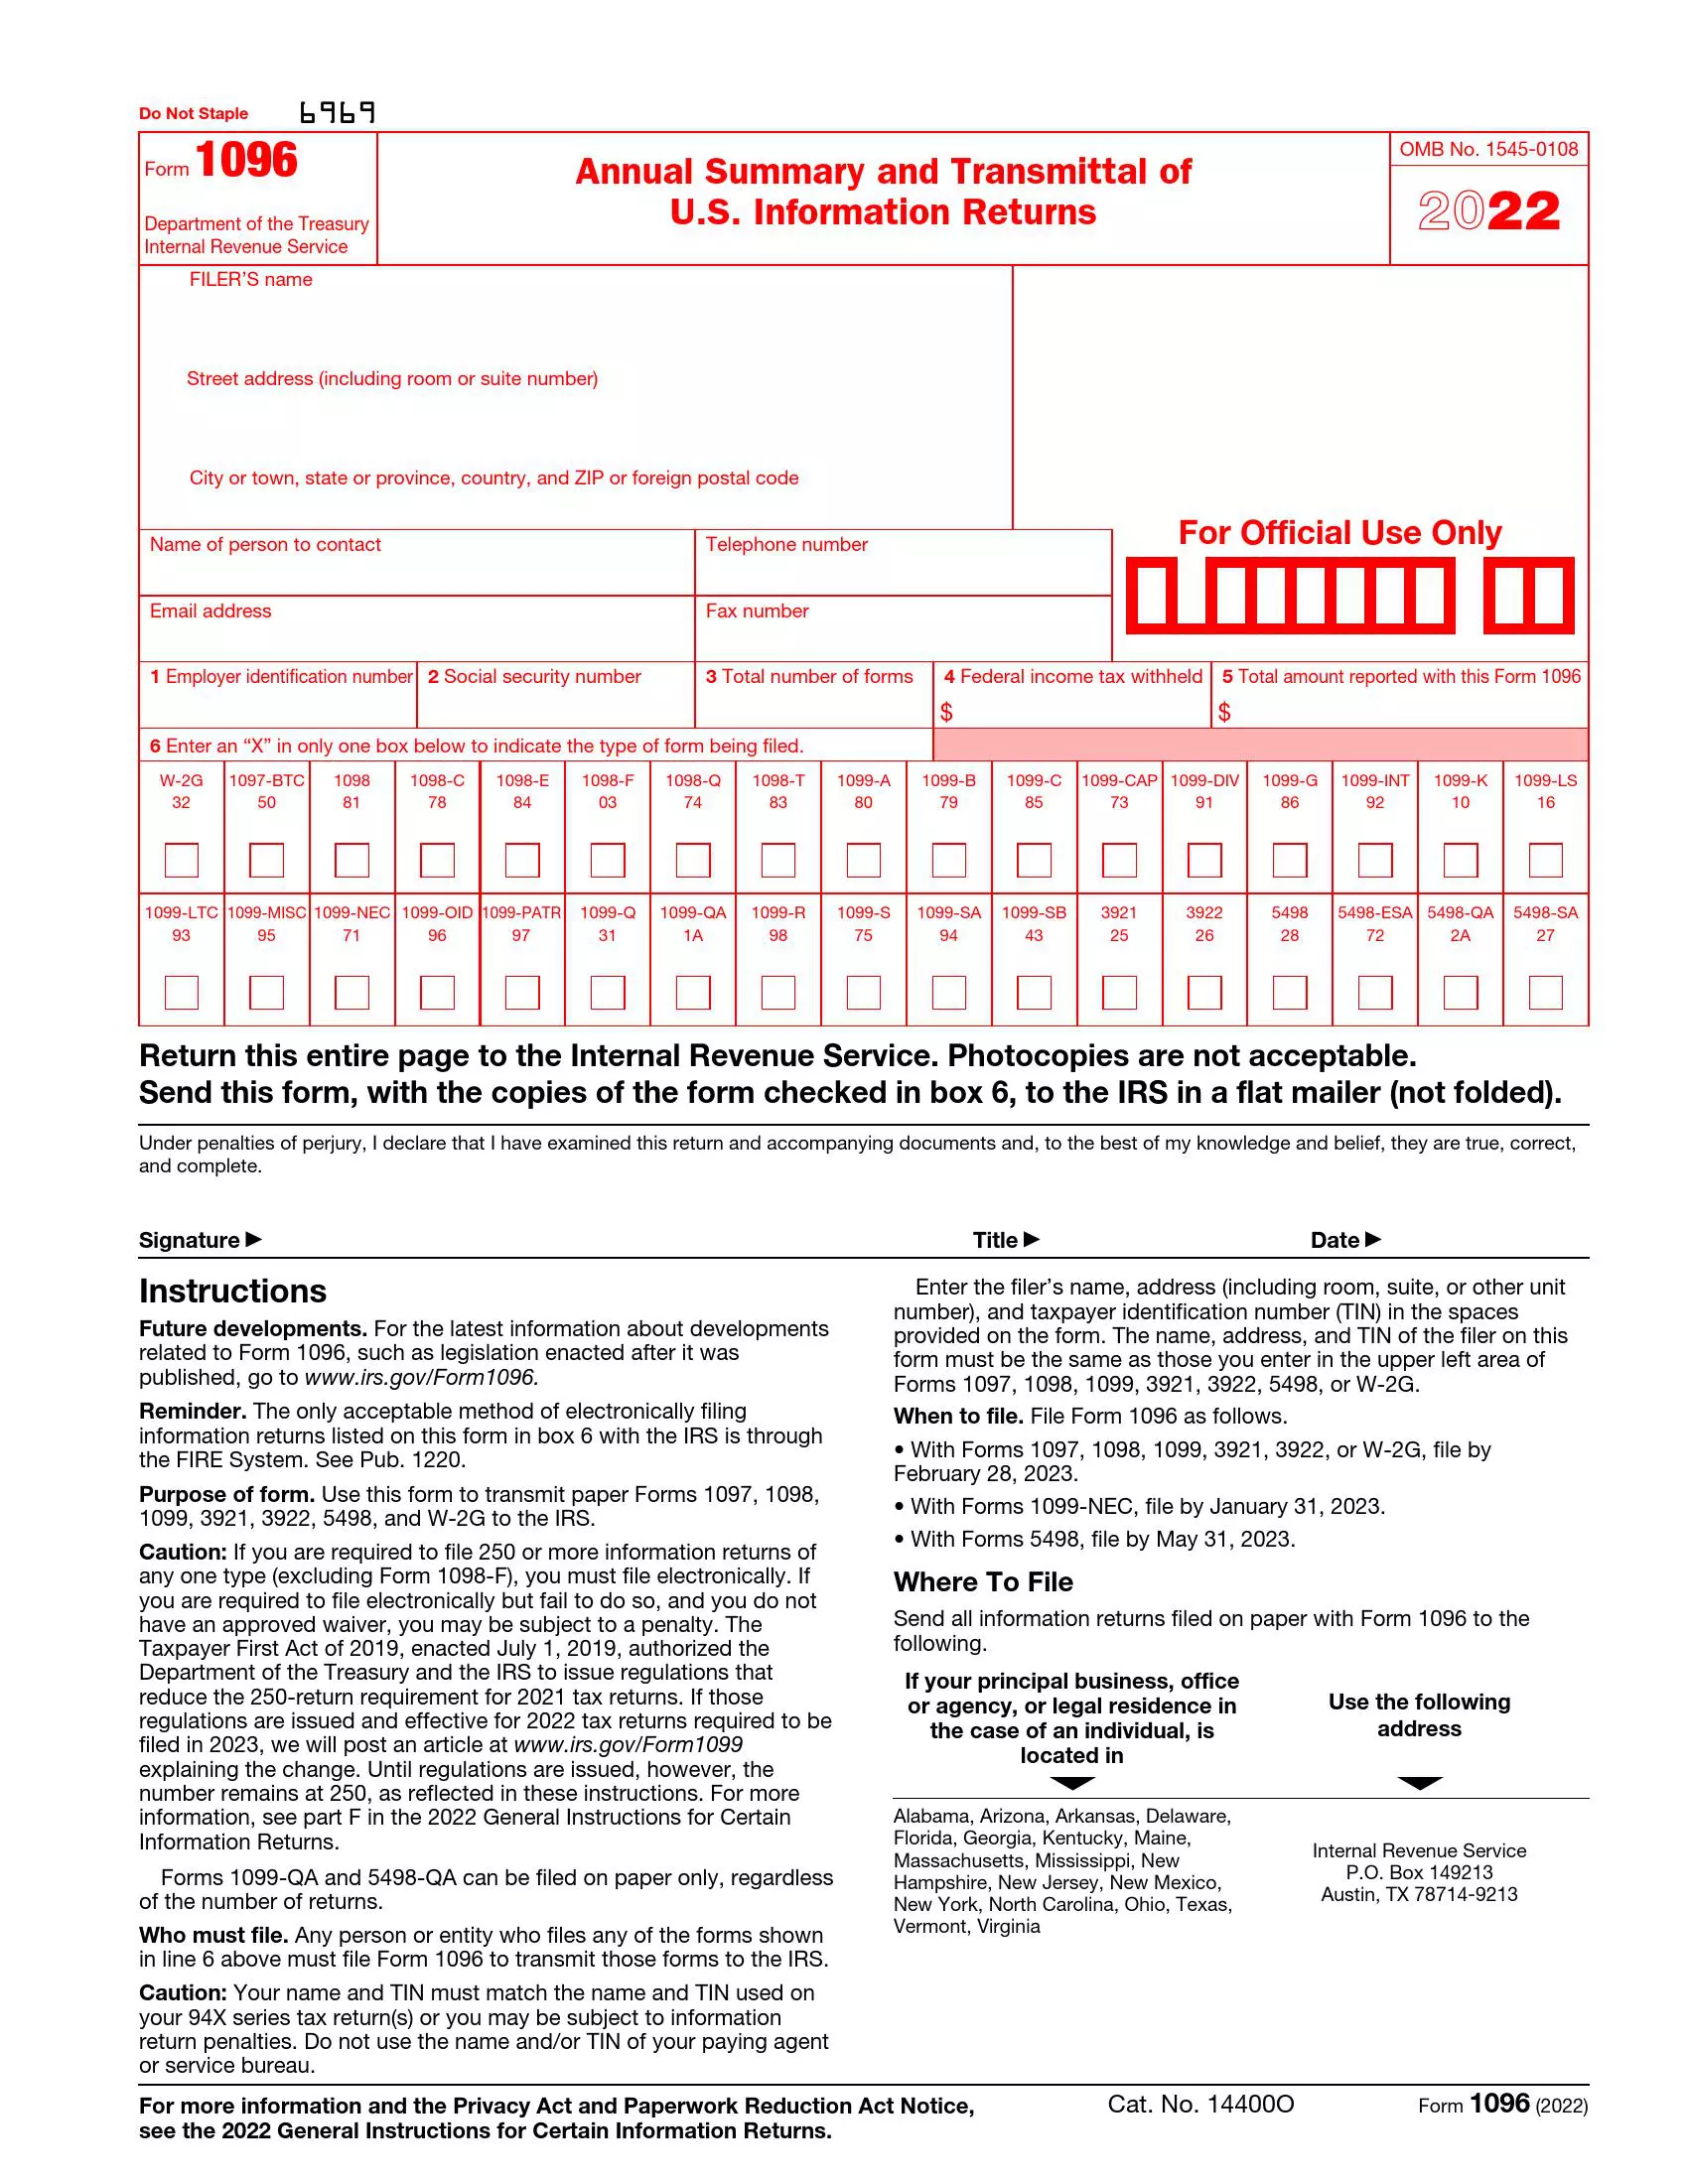 irs form 1096 2022 preview